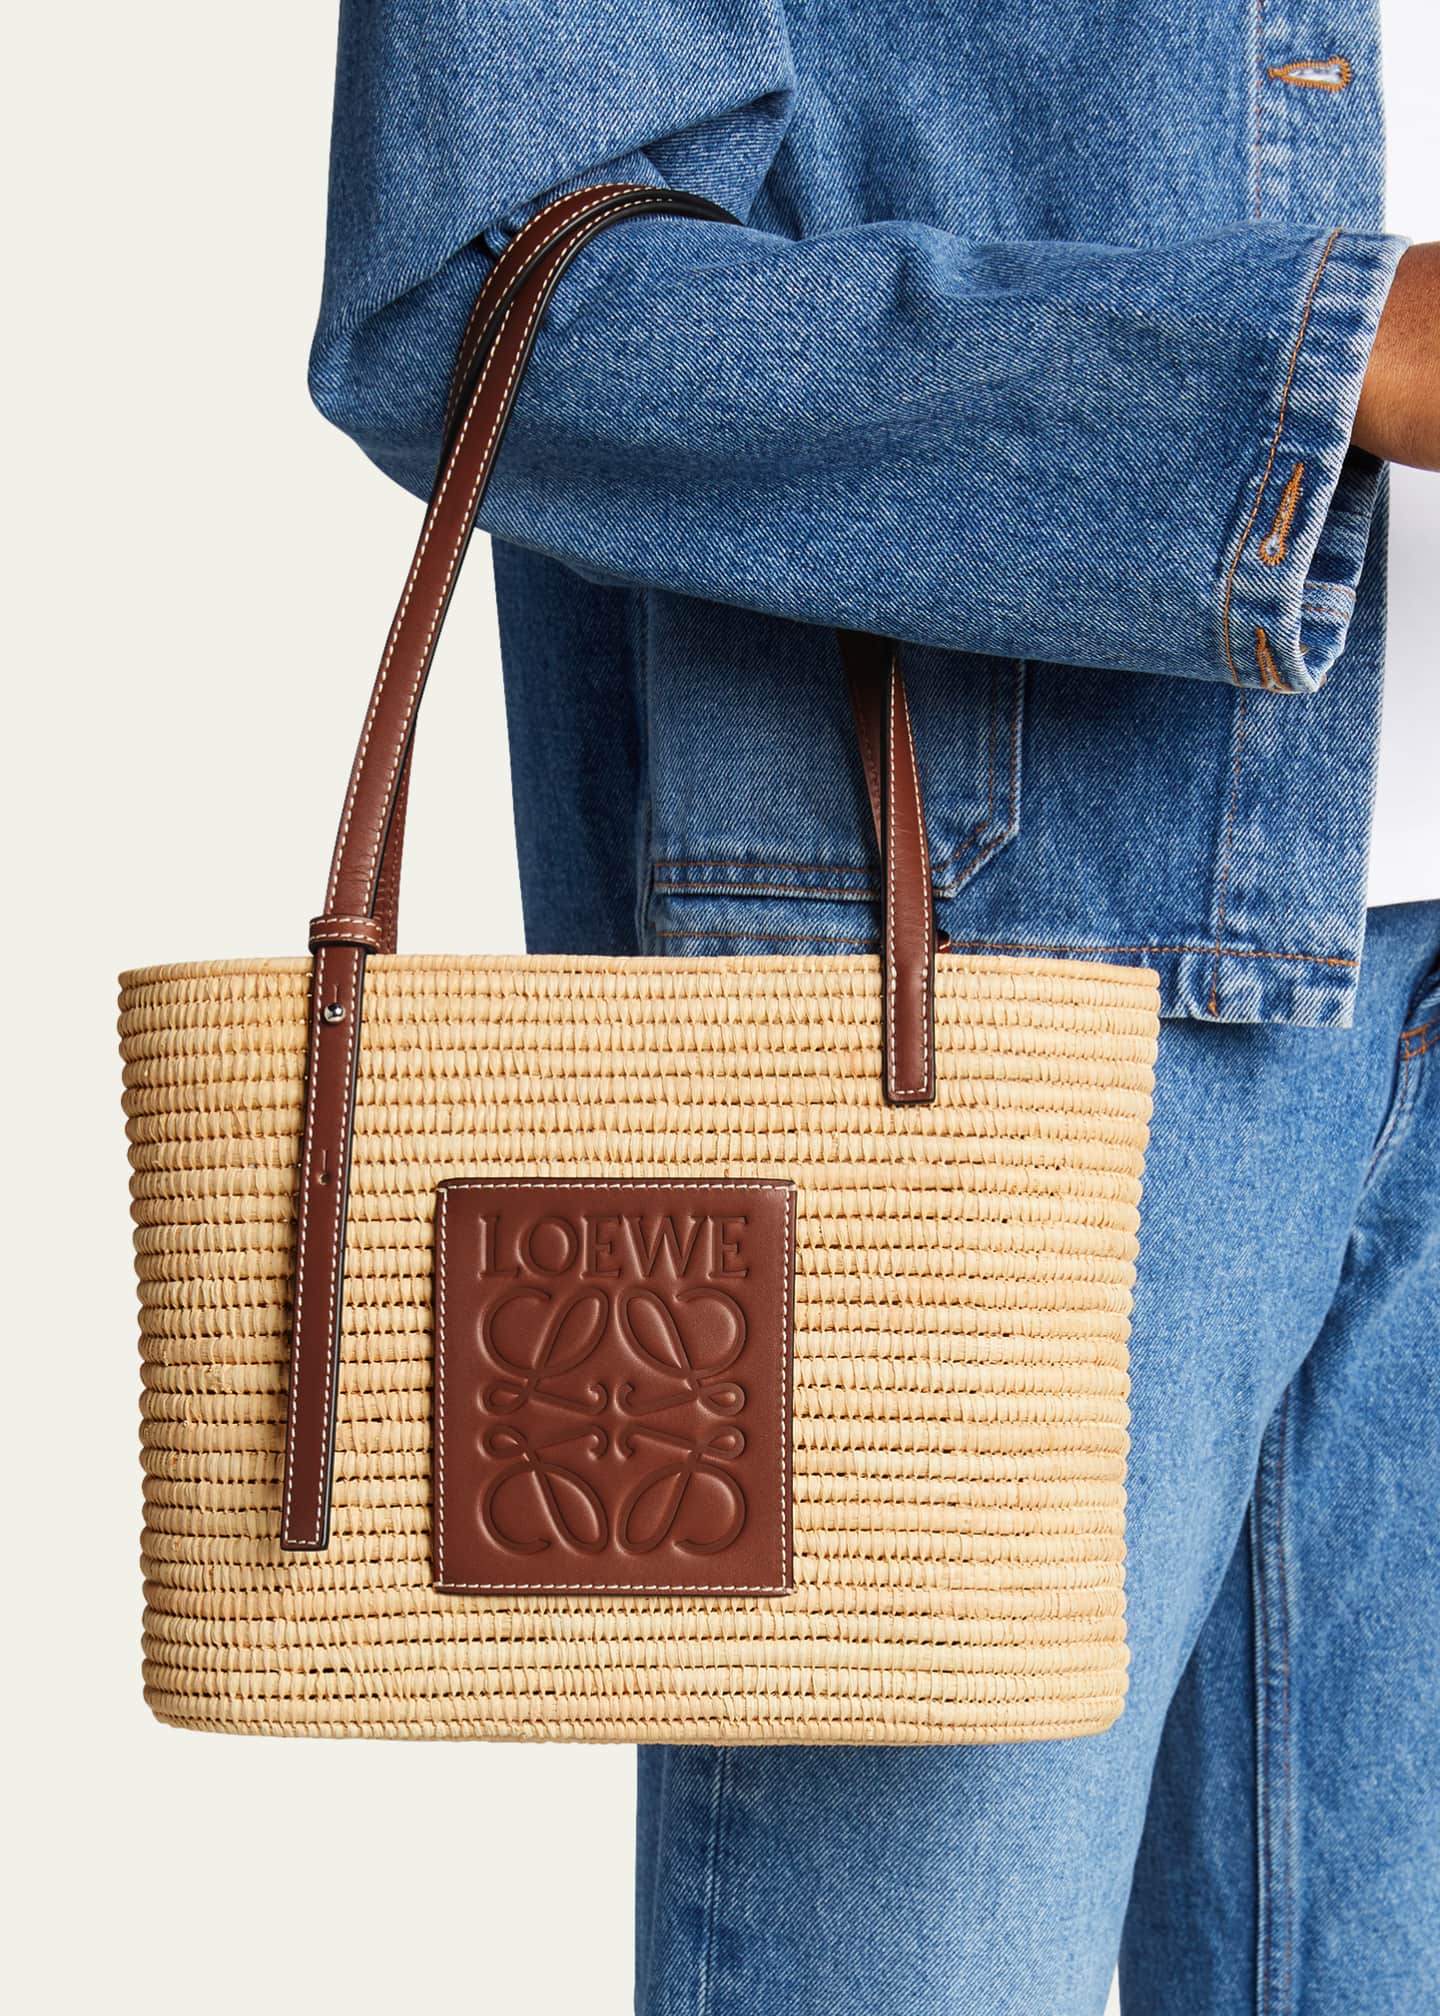 Loewe x Paula's Ibiza Square Basket Small Bag in Raffia with Leather Handles Image 2 of 5